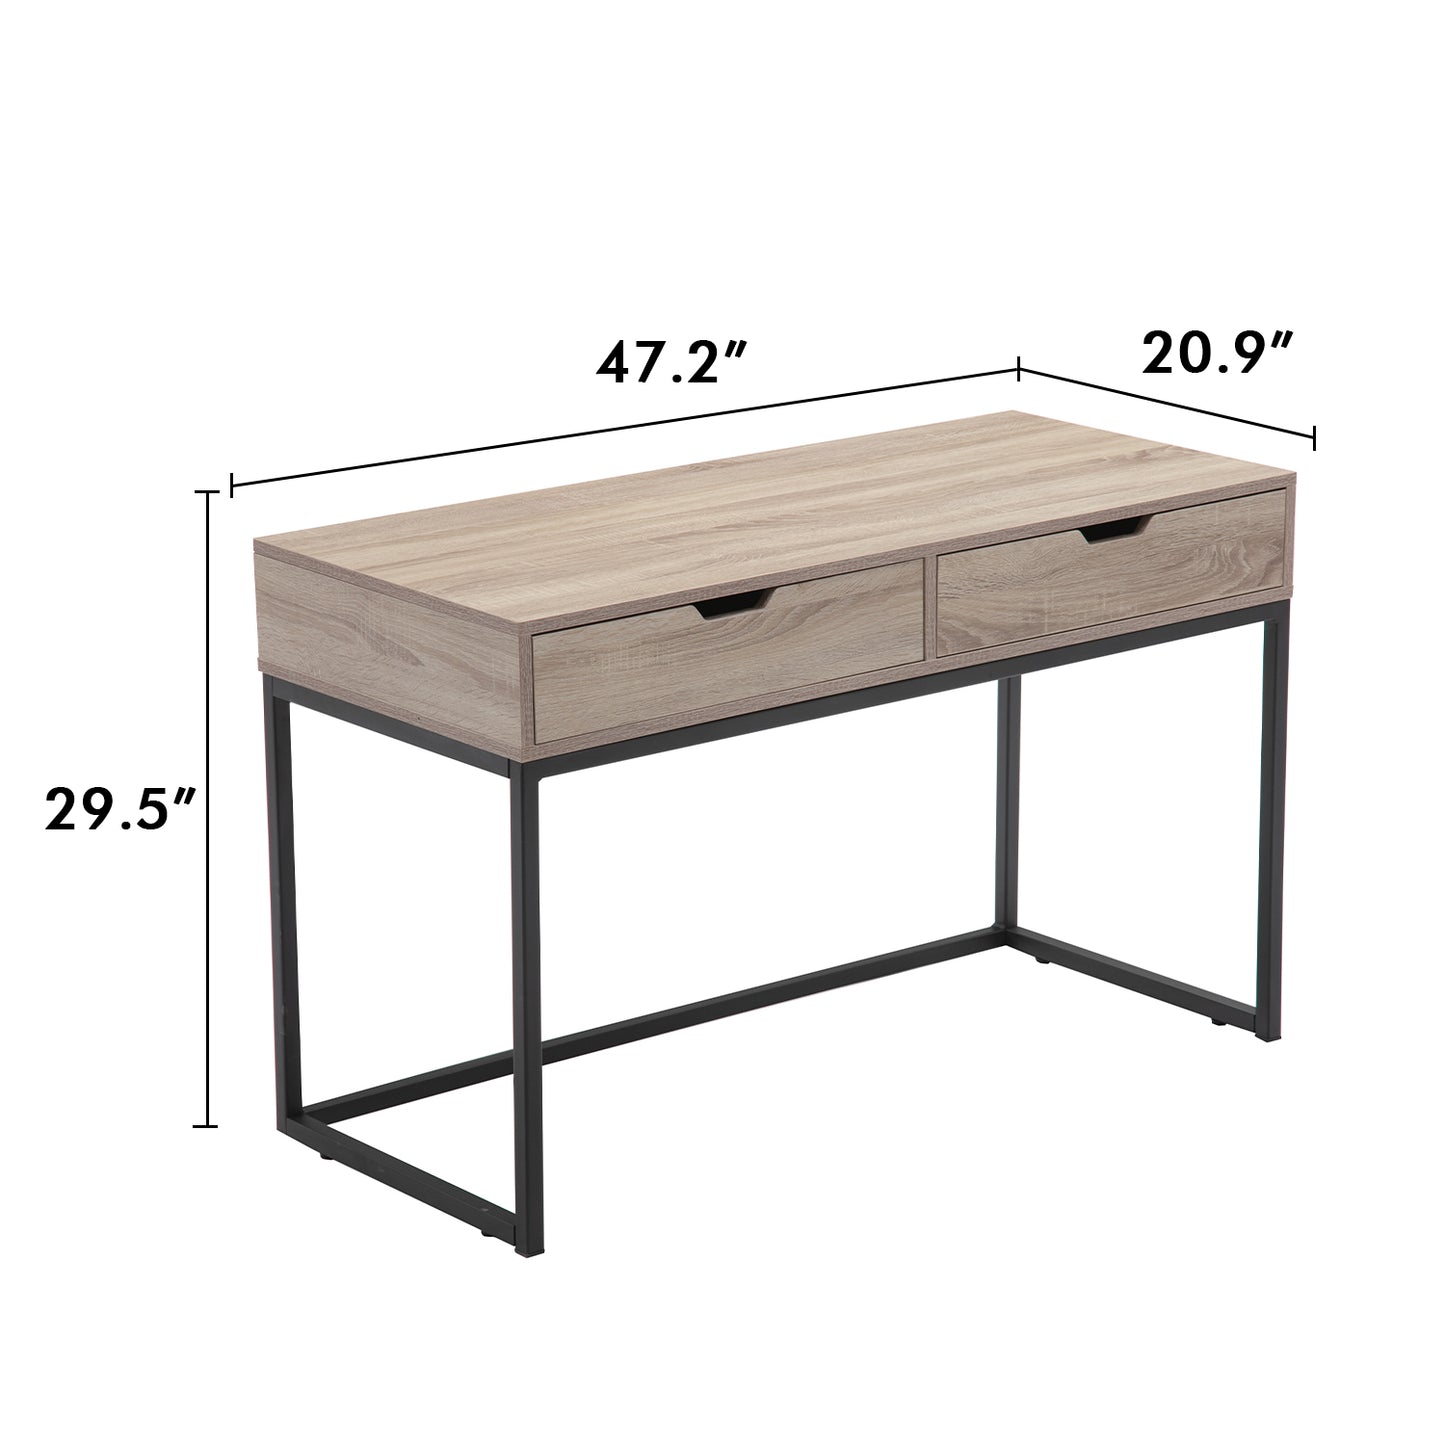 Bensu Desk，Desk with Two Drawers, Home Office Table,Writing Study Table